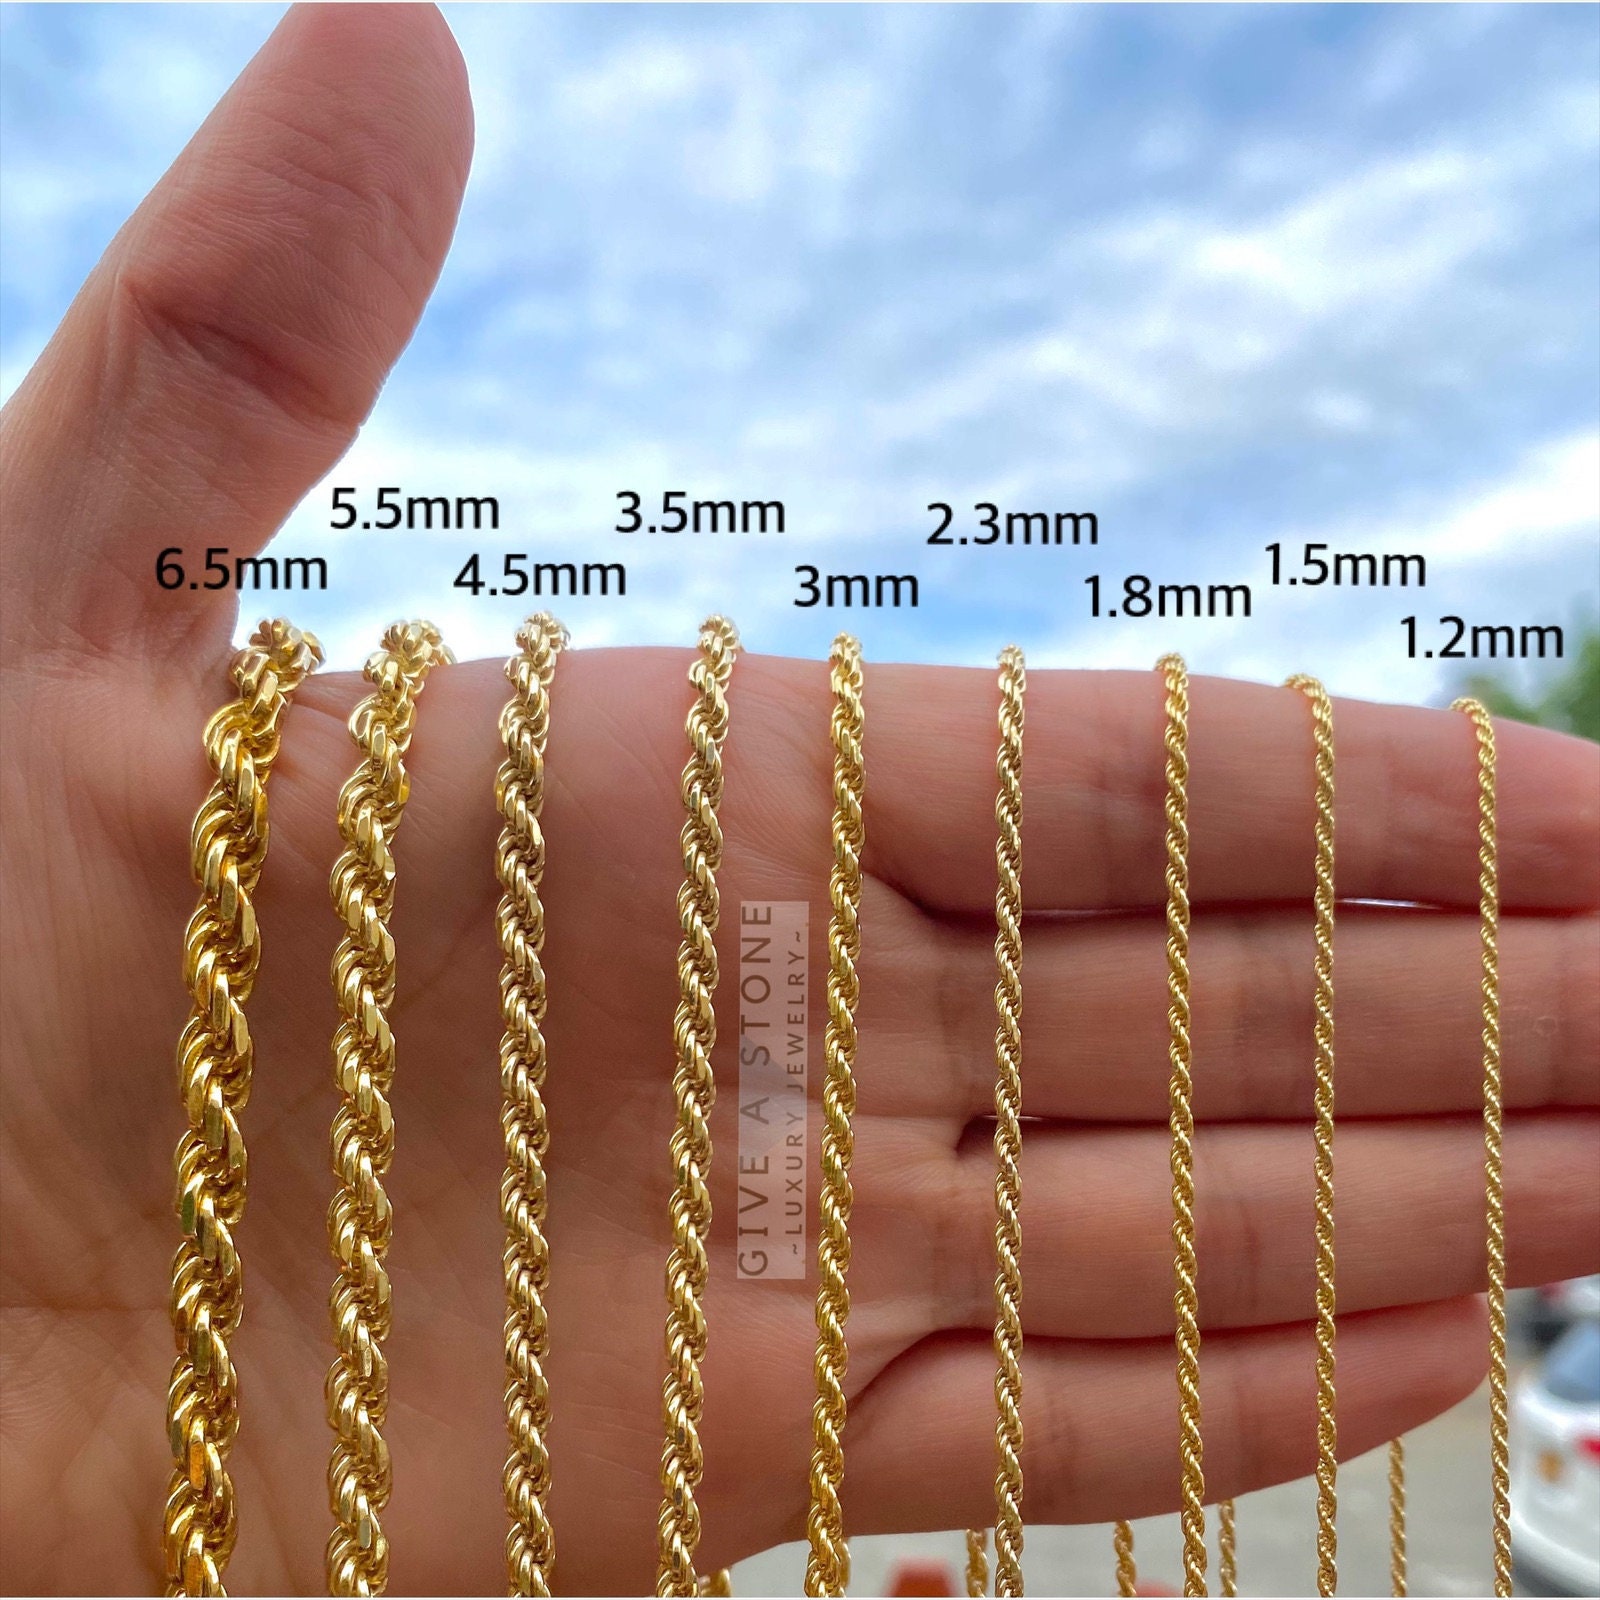 14K Gold Diamond Twist Over 925 Sterling Silver Rope 1.2mm 1.5mm 1.8mm 2.3mm  3mm 3.5mm 4mm 4.5mm 5.5mm 6.5mmeveryday Chain Gift Sale 